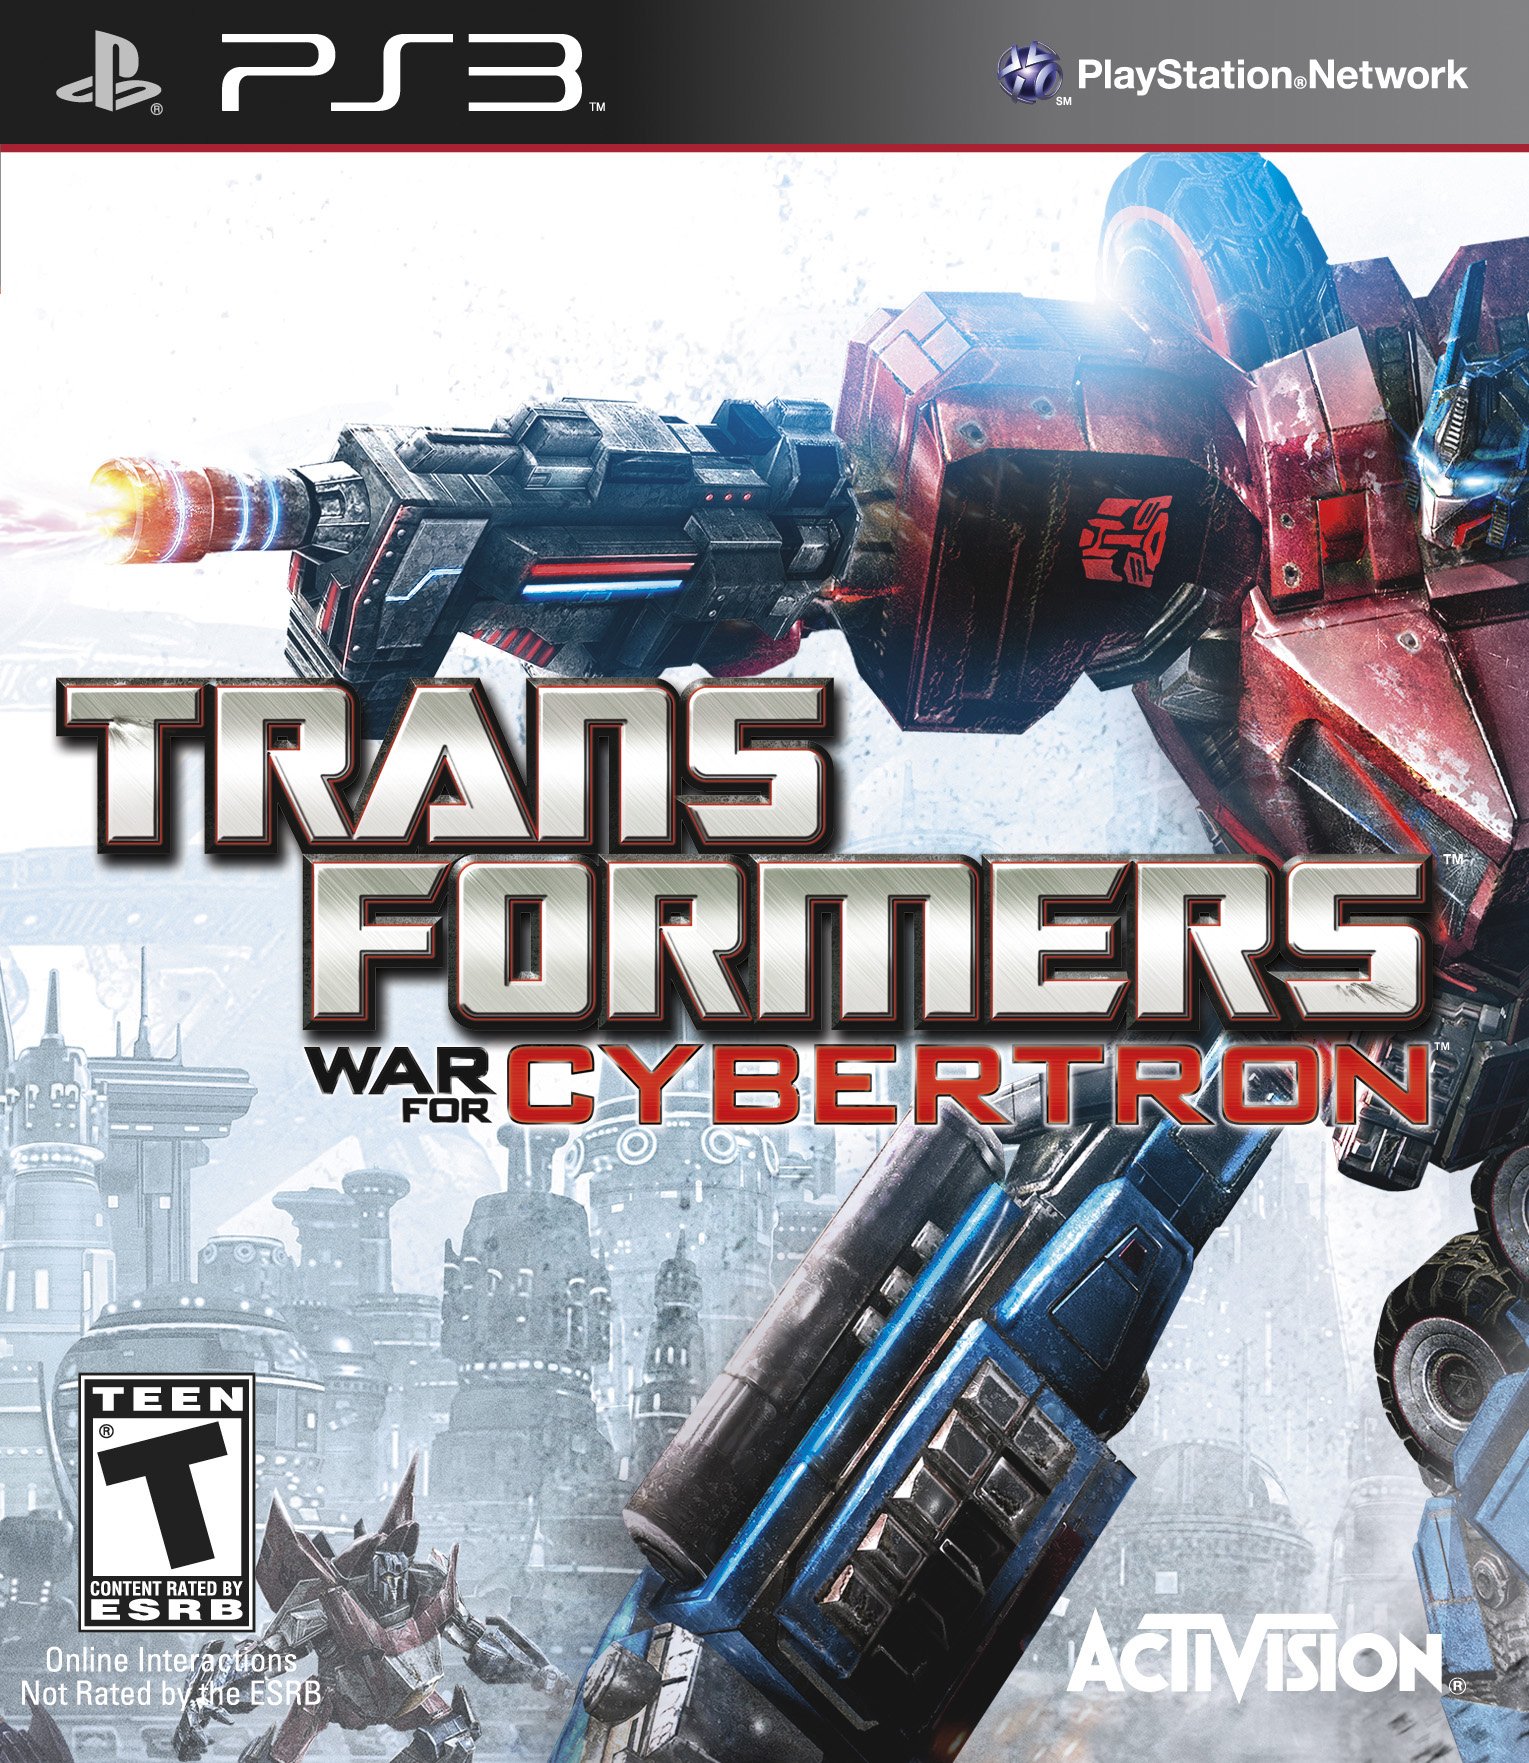 Transformers: War for Cybertron - Playstation 3